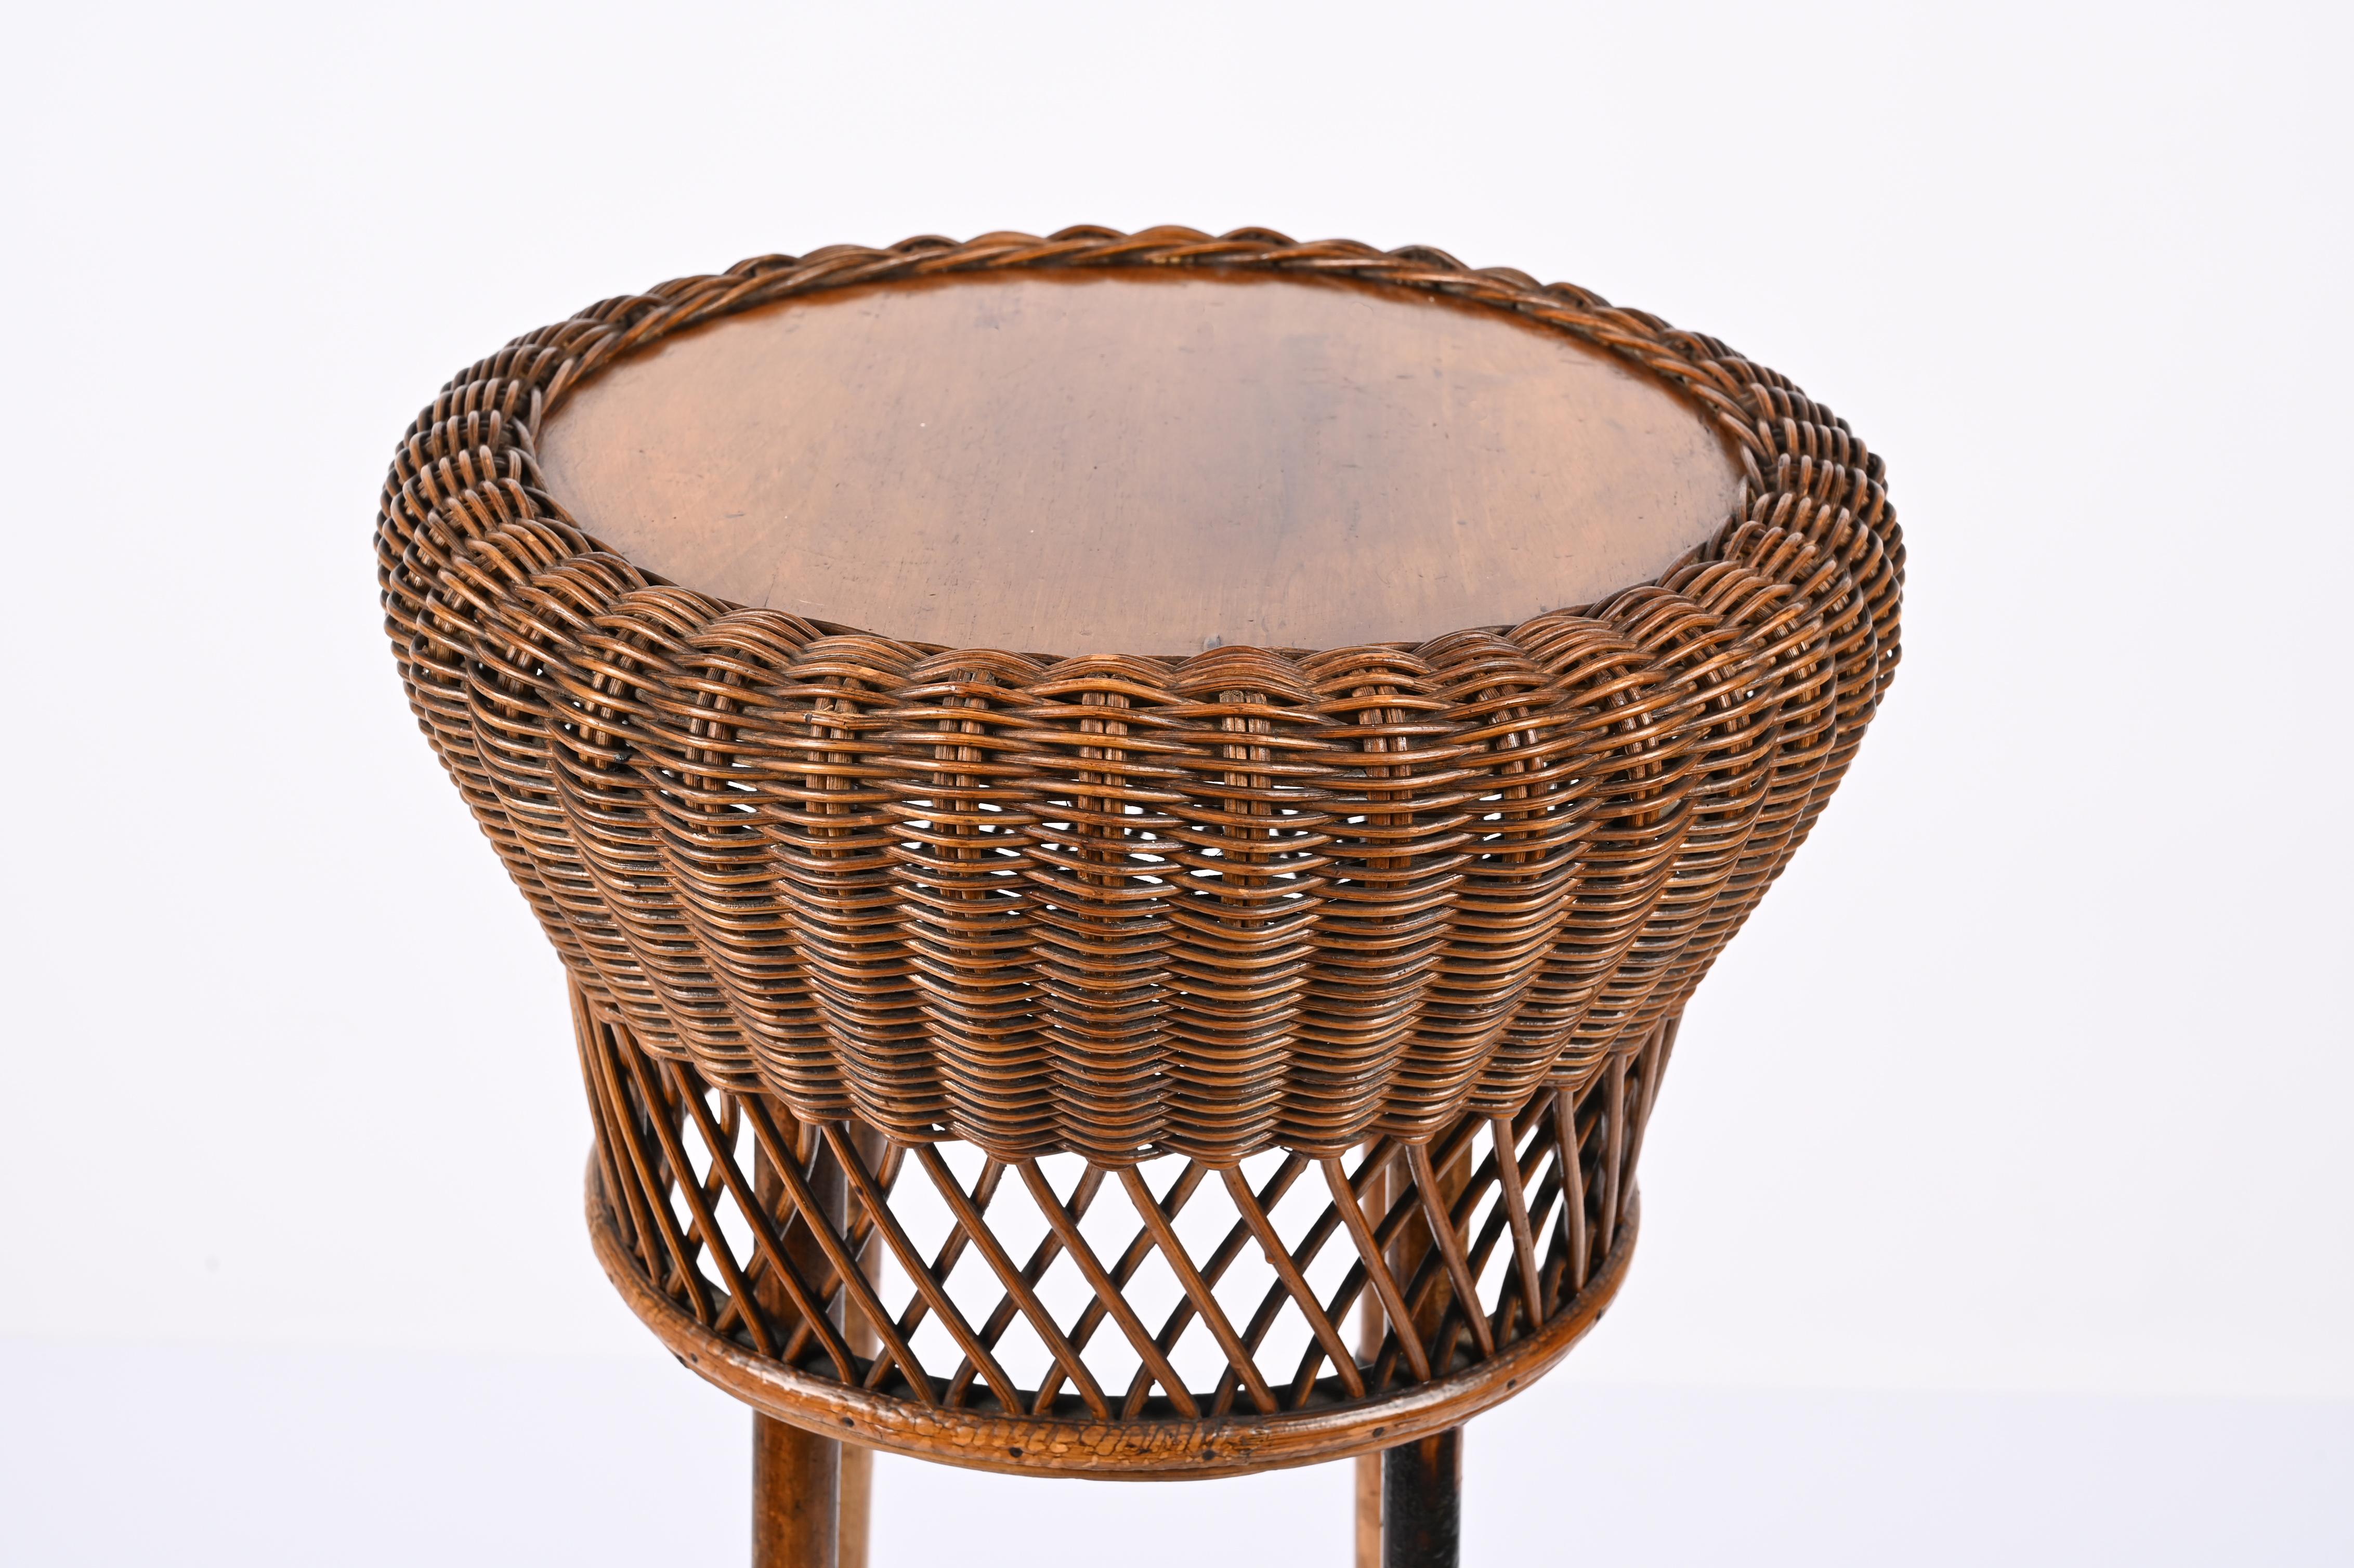 Midcentury Double-Levelled Circular Rattan and Bamboo Italian Pedestal, 1950s For Sale 6